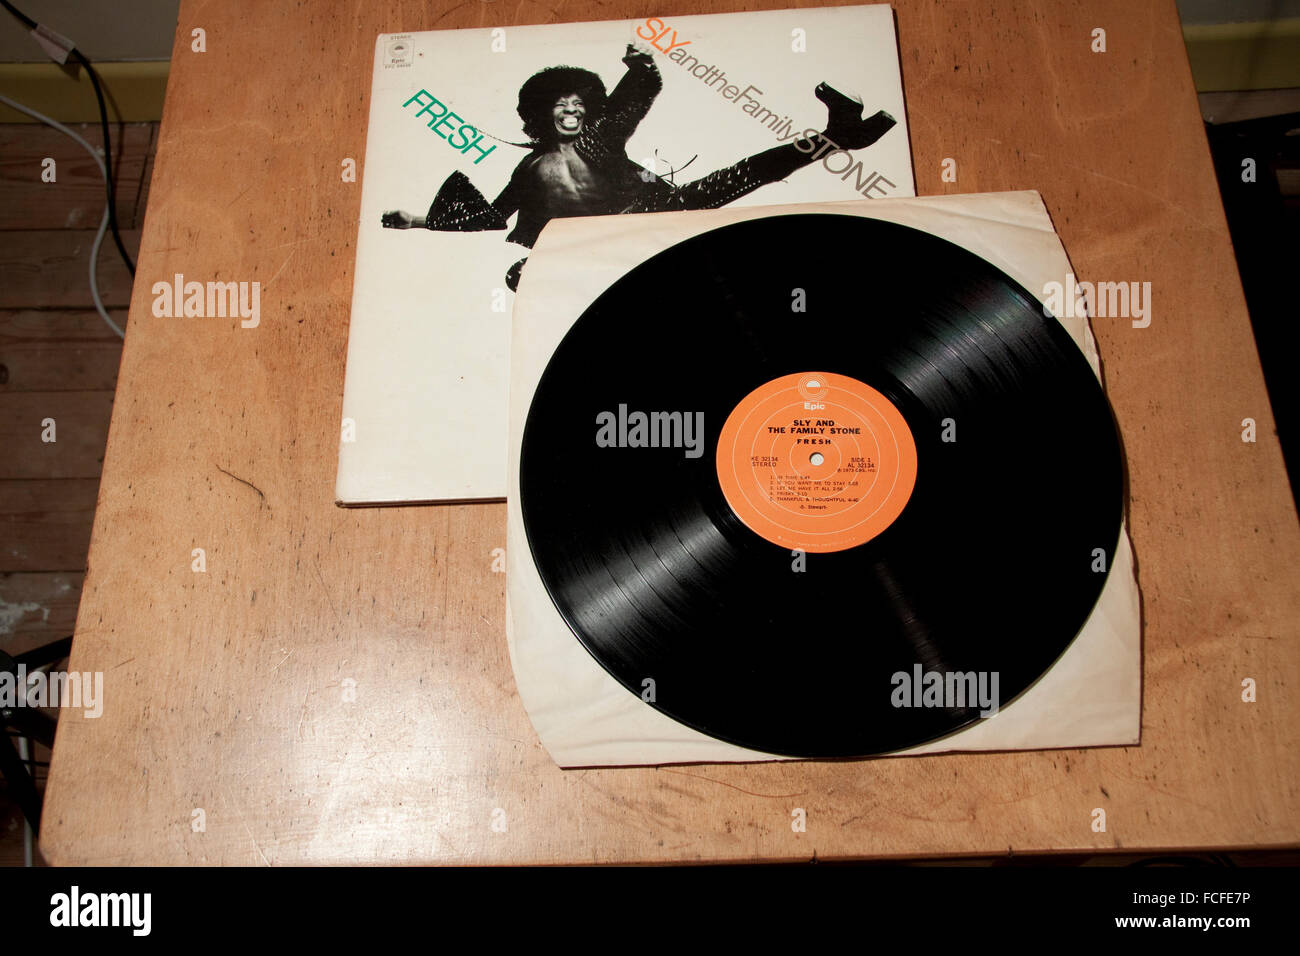 The cover and vinyl of Sly and the Family Stone's sixth album Fresh Stock Photo